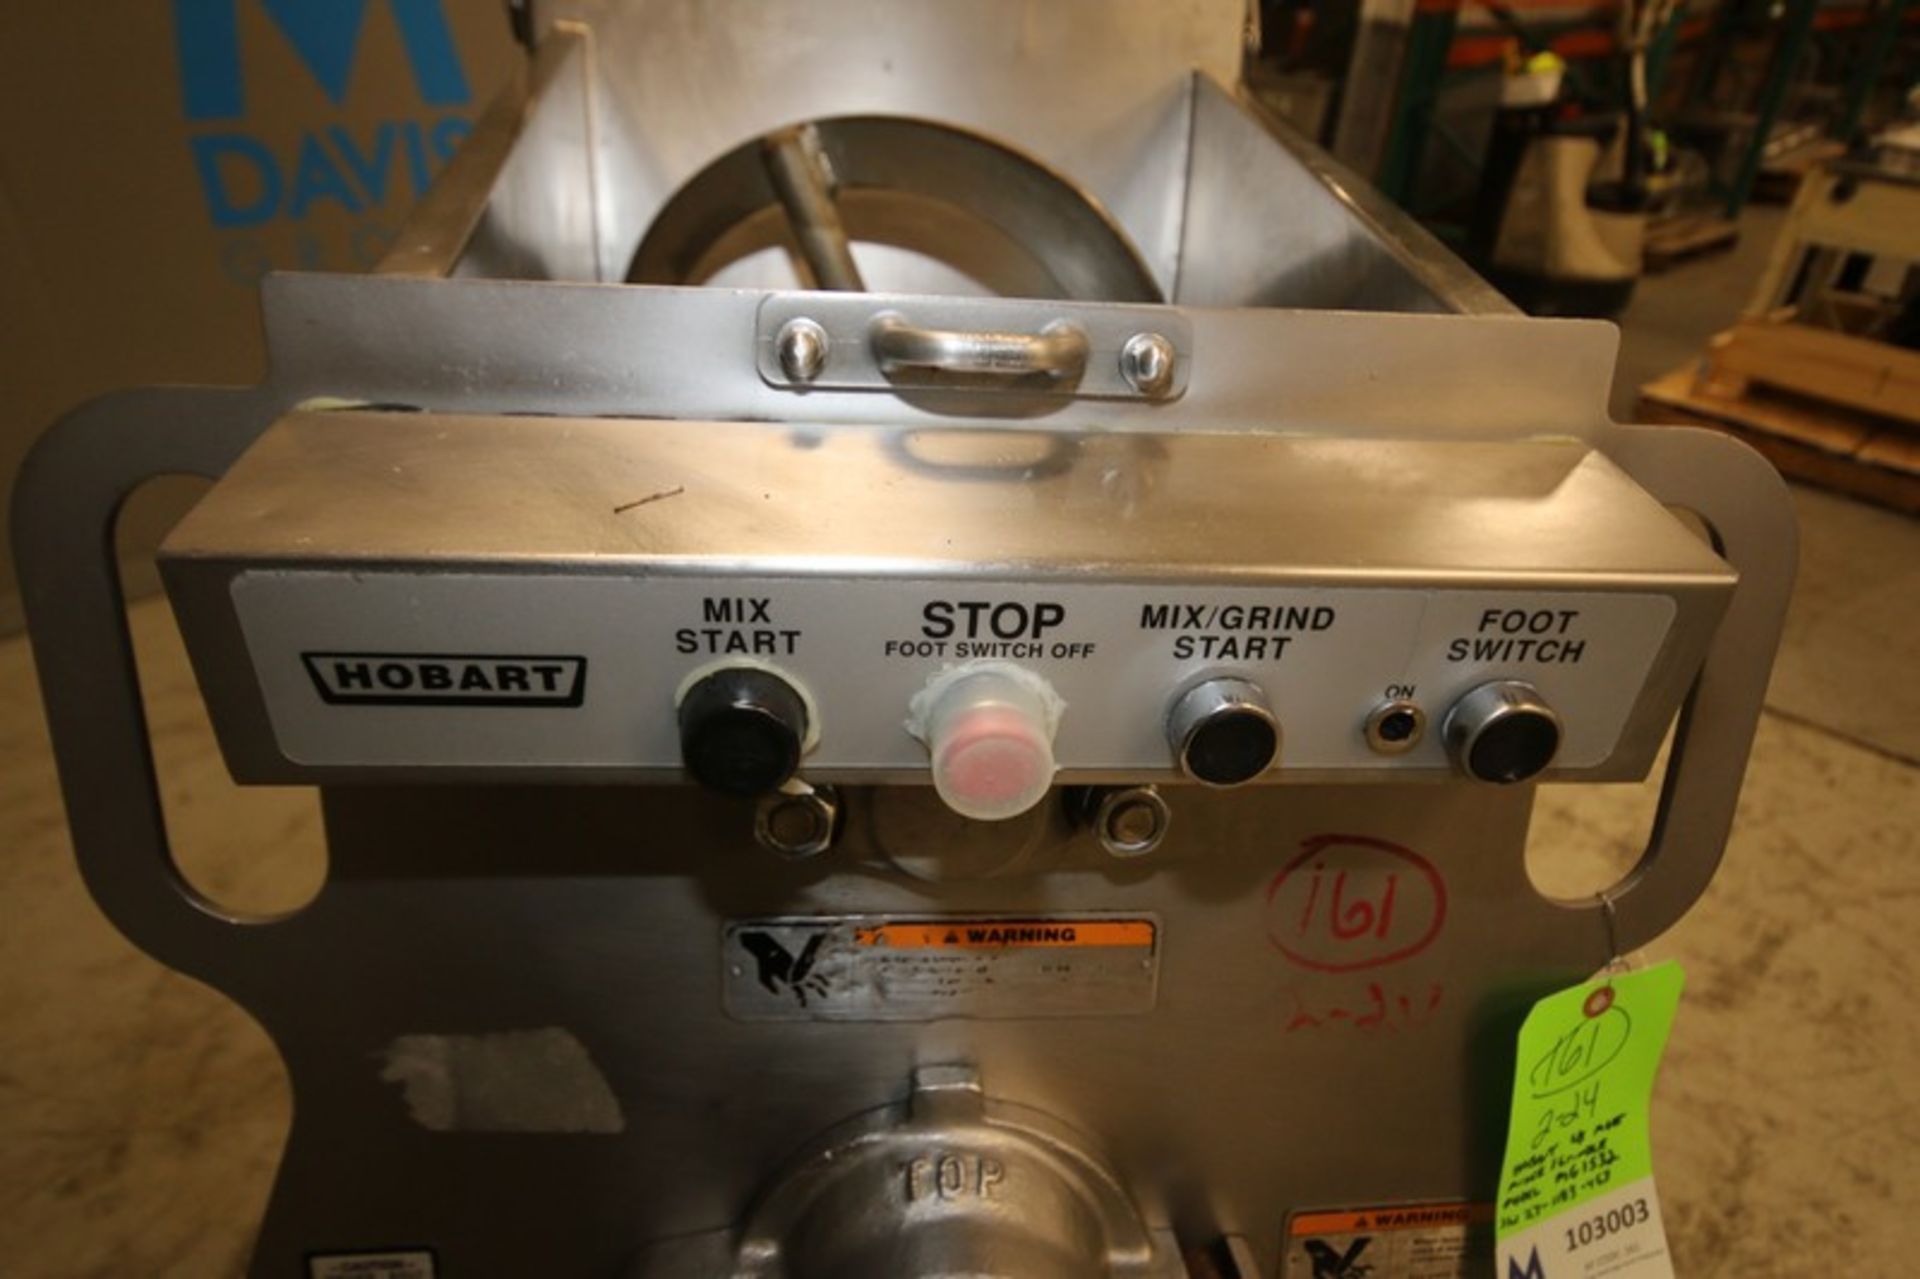 Hobart S/S 150 lb. Capacity Portable Meat Mixer / Grinder, Model MG1532, SN 27-1183-453, with - Image 5 of 8